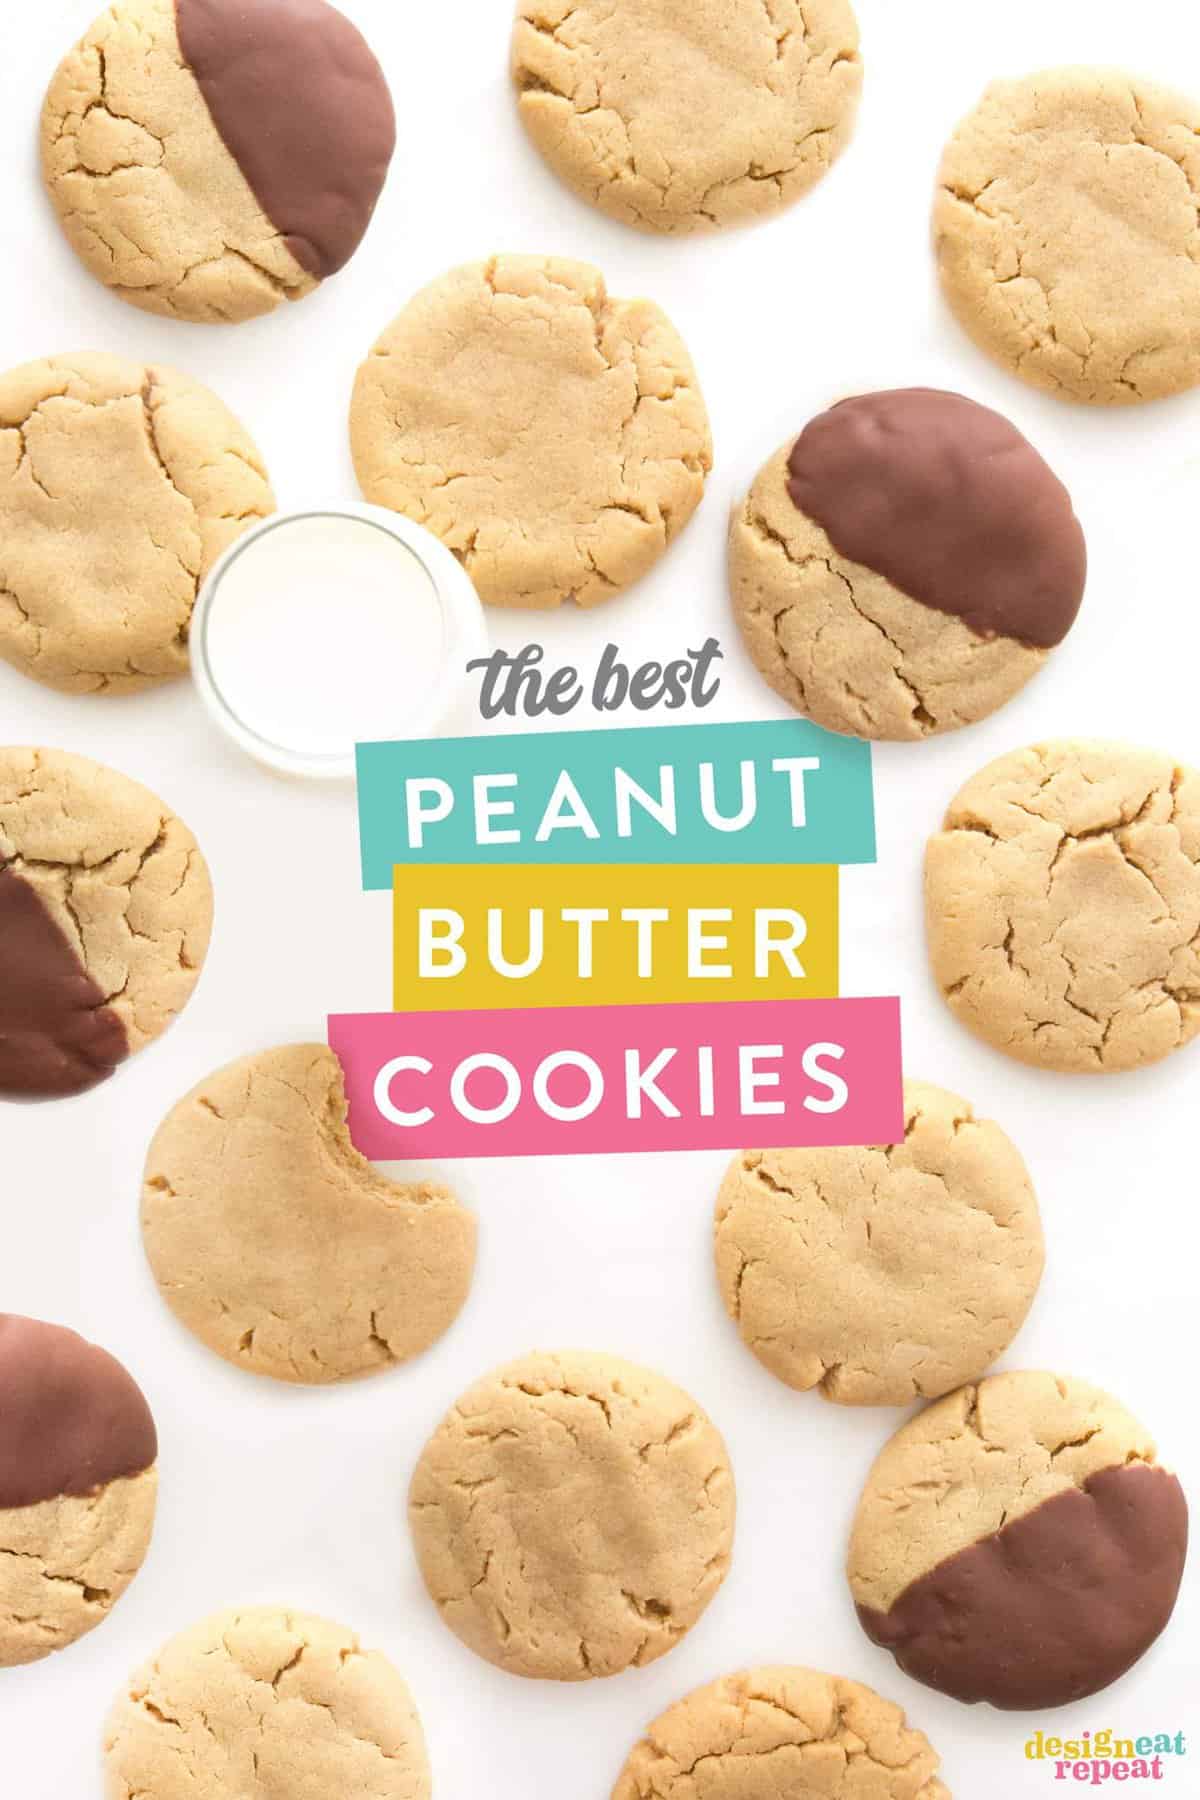 The best peanut butter cookies - perfectly soft, thick, moist, chewy, and delicious!